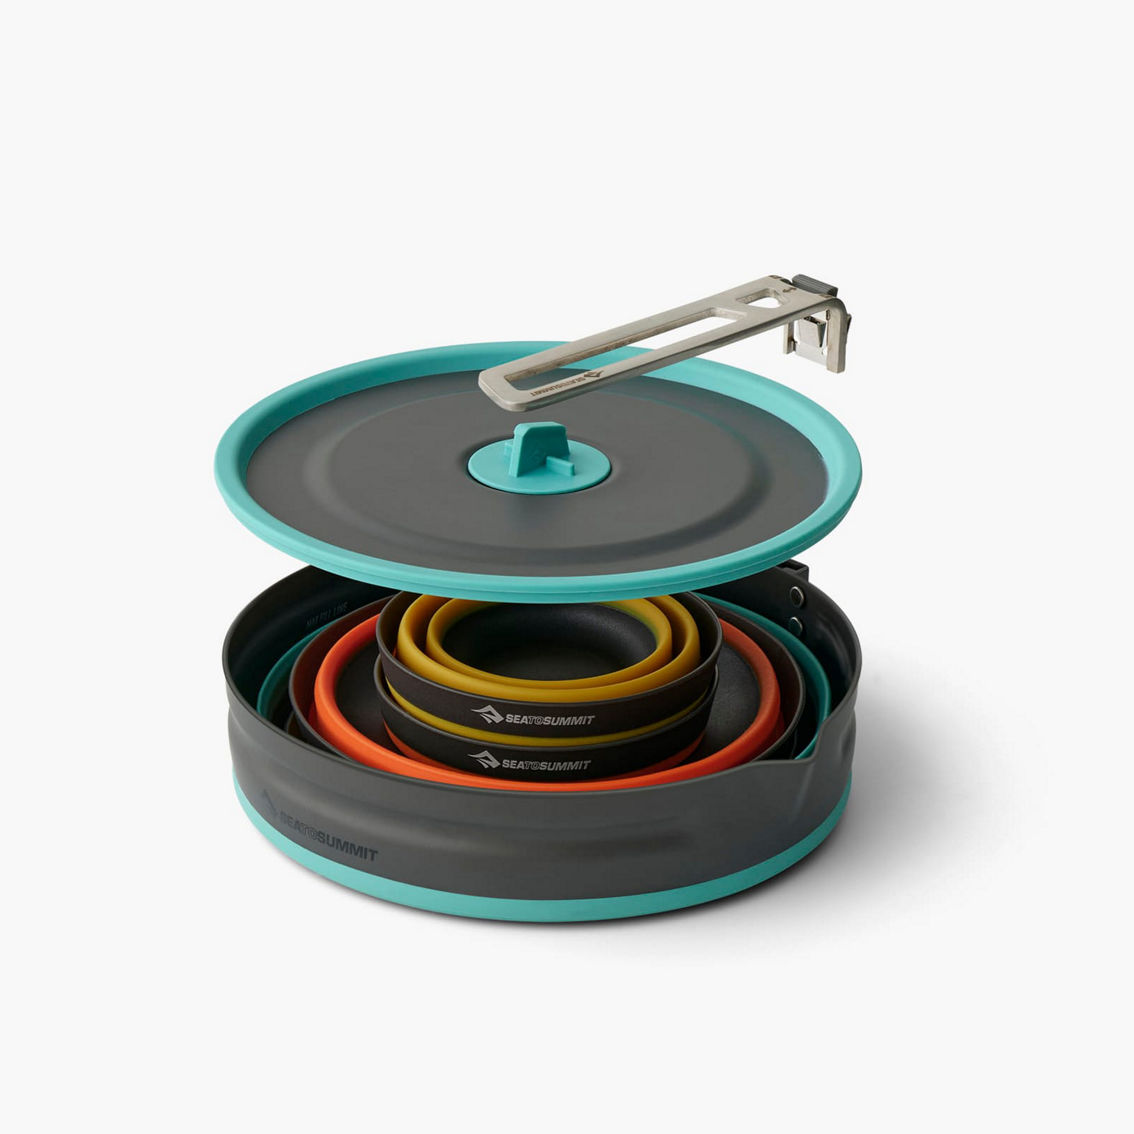 Sea to Summit Frontier UL Collapsible One Pot Cook Set Multi [2P] [5 Piece] - Image 2 of 2